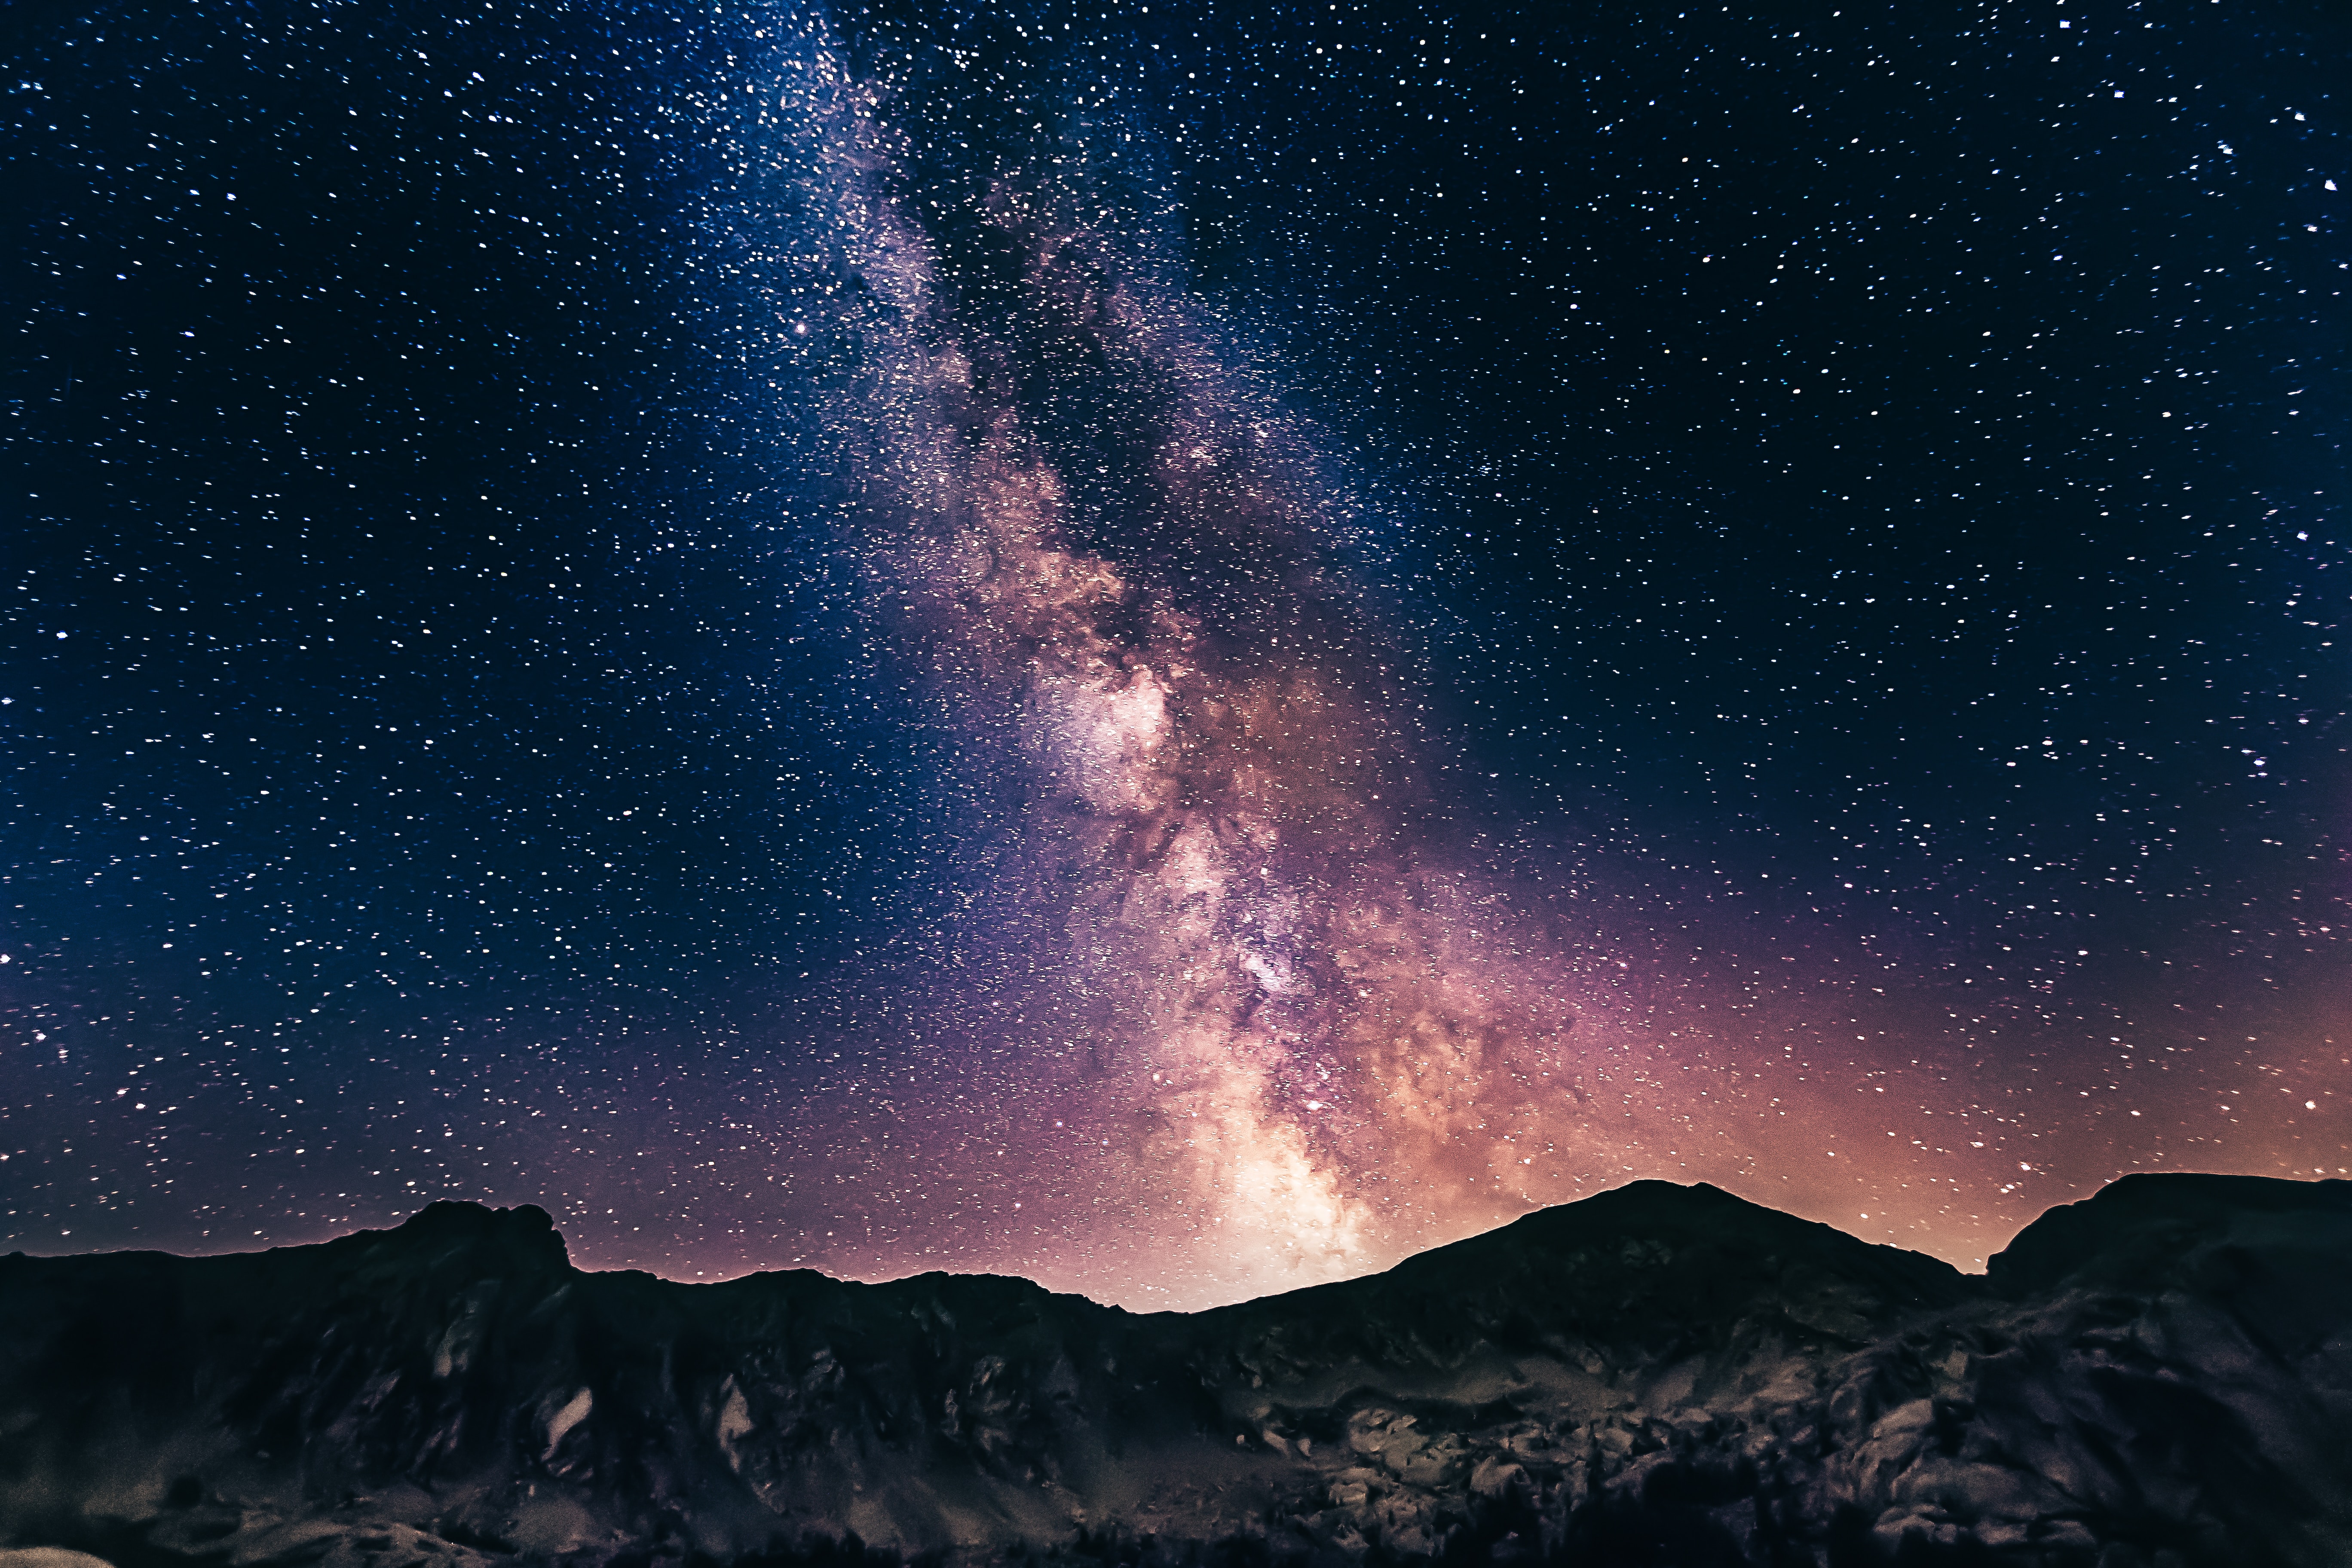 A stunning image of the Milky Way galaxy with stars and dust visible in the background, shot using long exposure photography techniques. The image has been processed to reduce noise and enhance color and contrast.